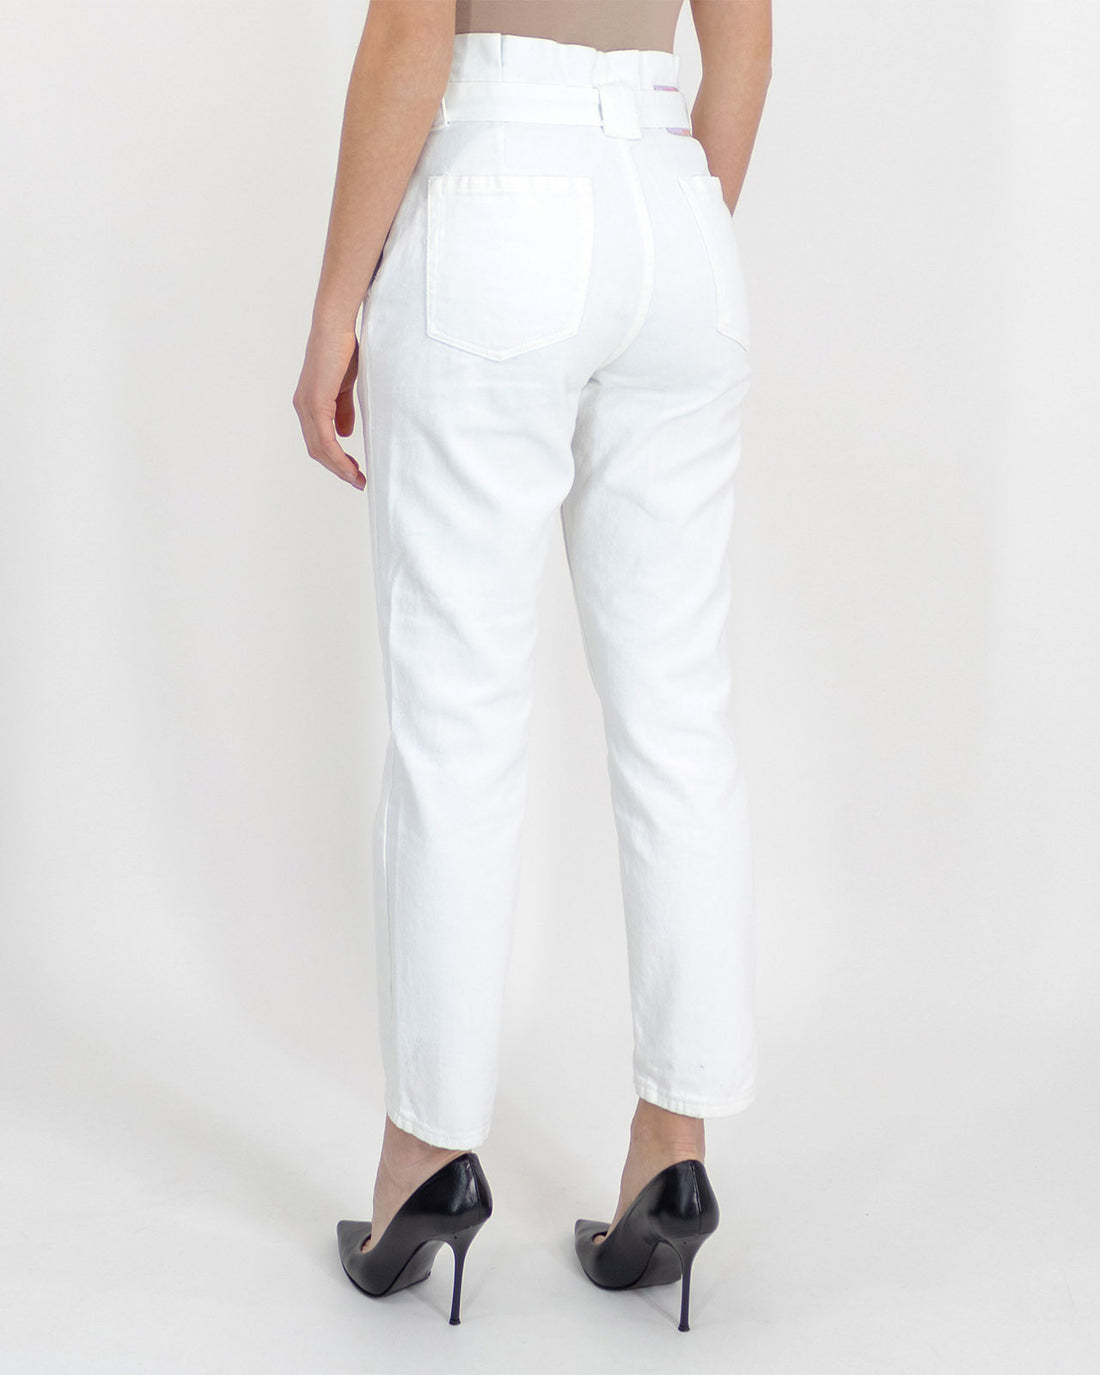 White jeans with bow